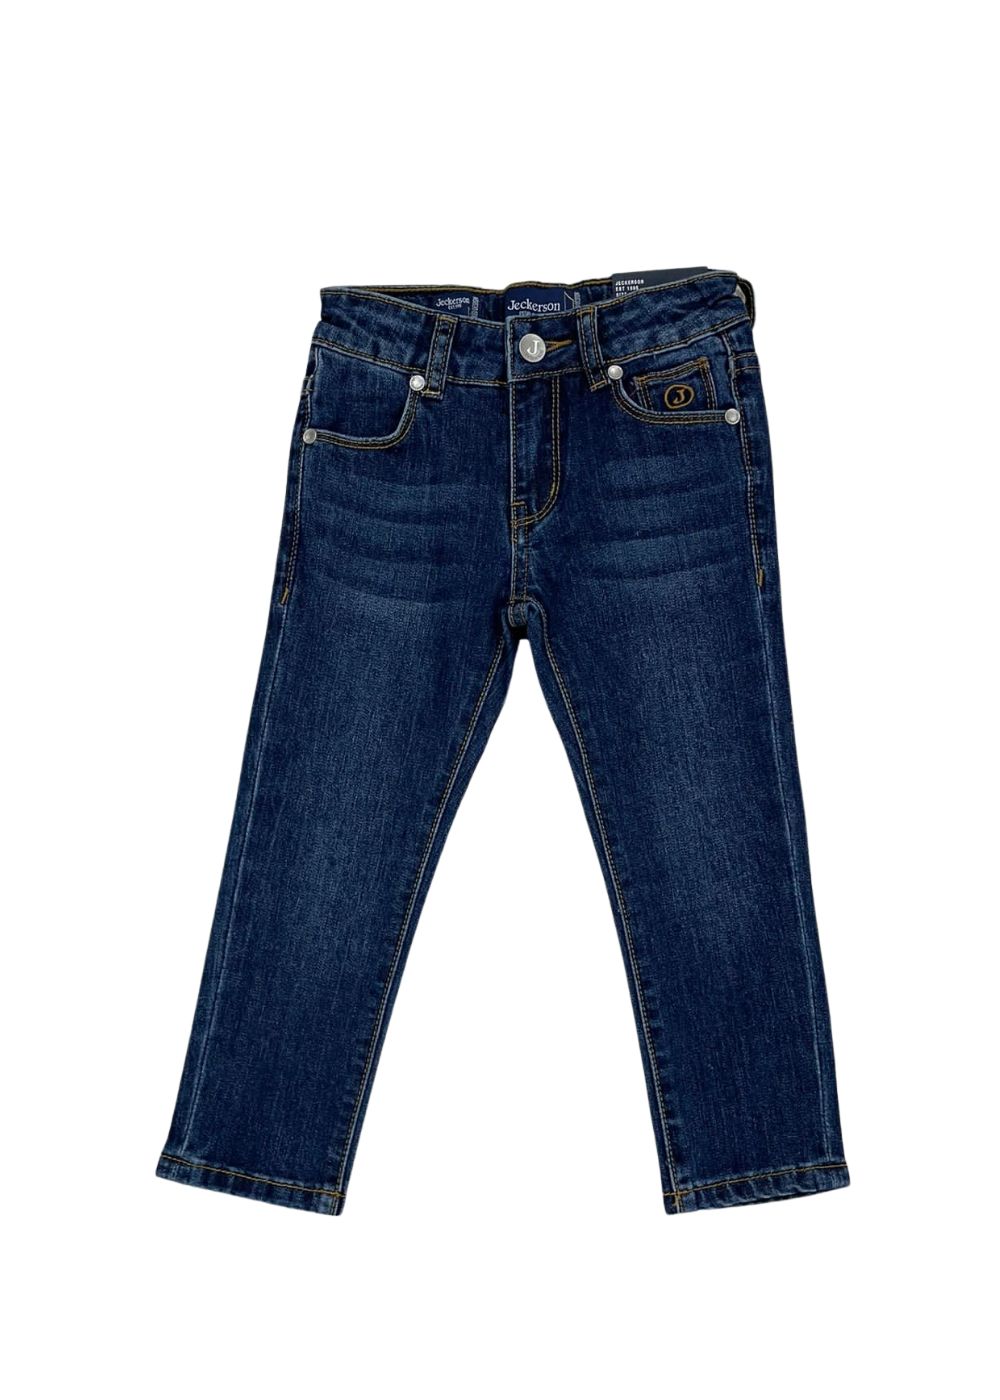 Featured image for “Jeckerson Jeans Scuro”